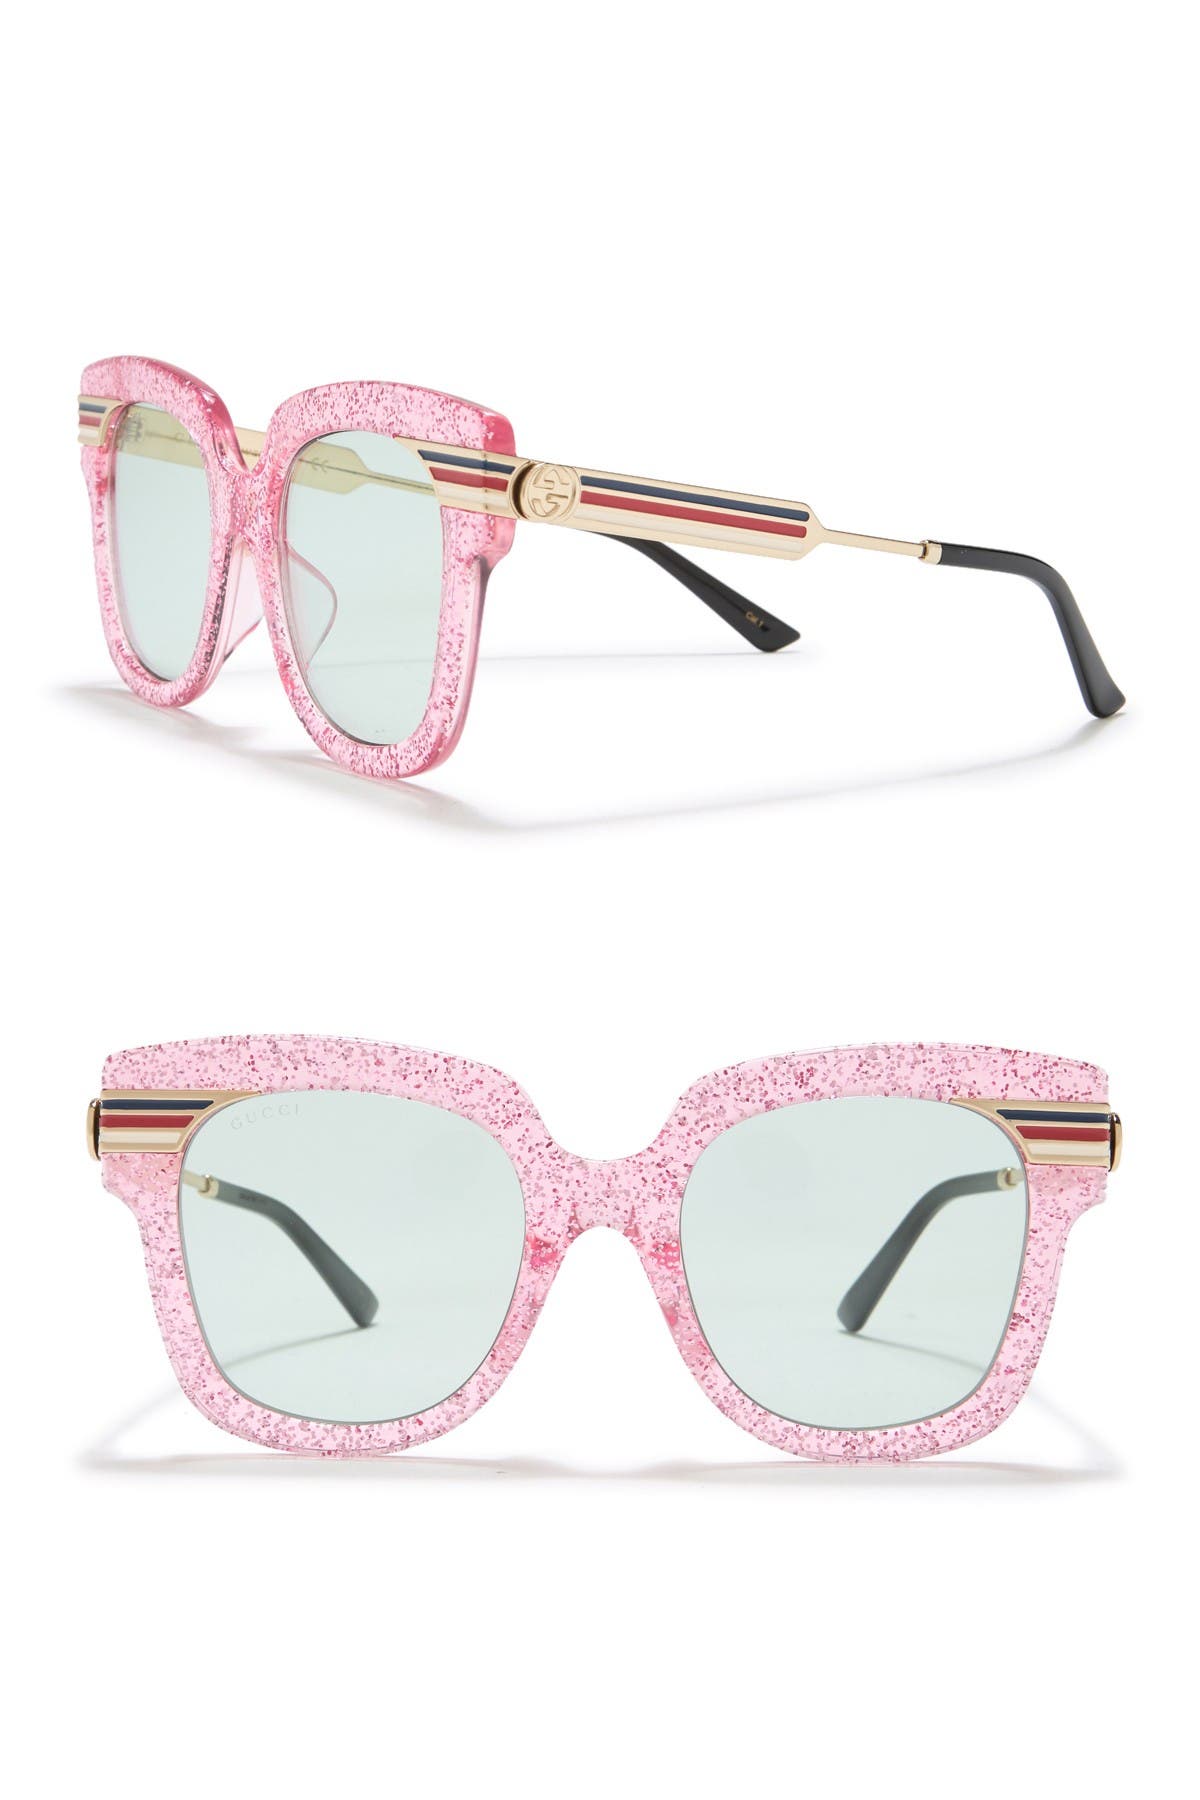 gucci pink sparkly sunglasses